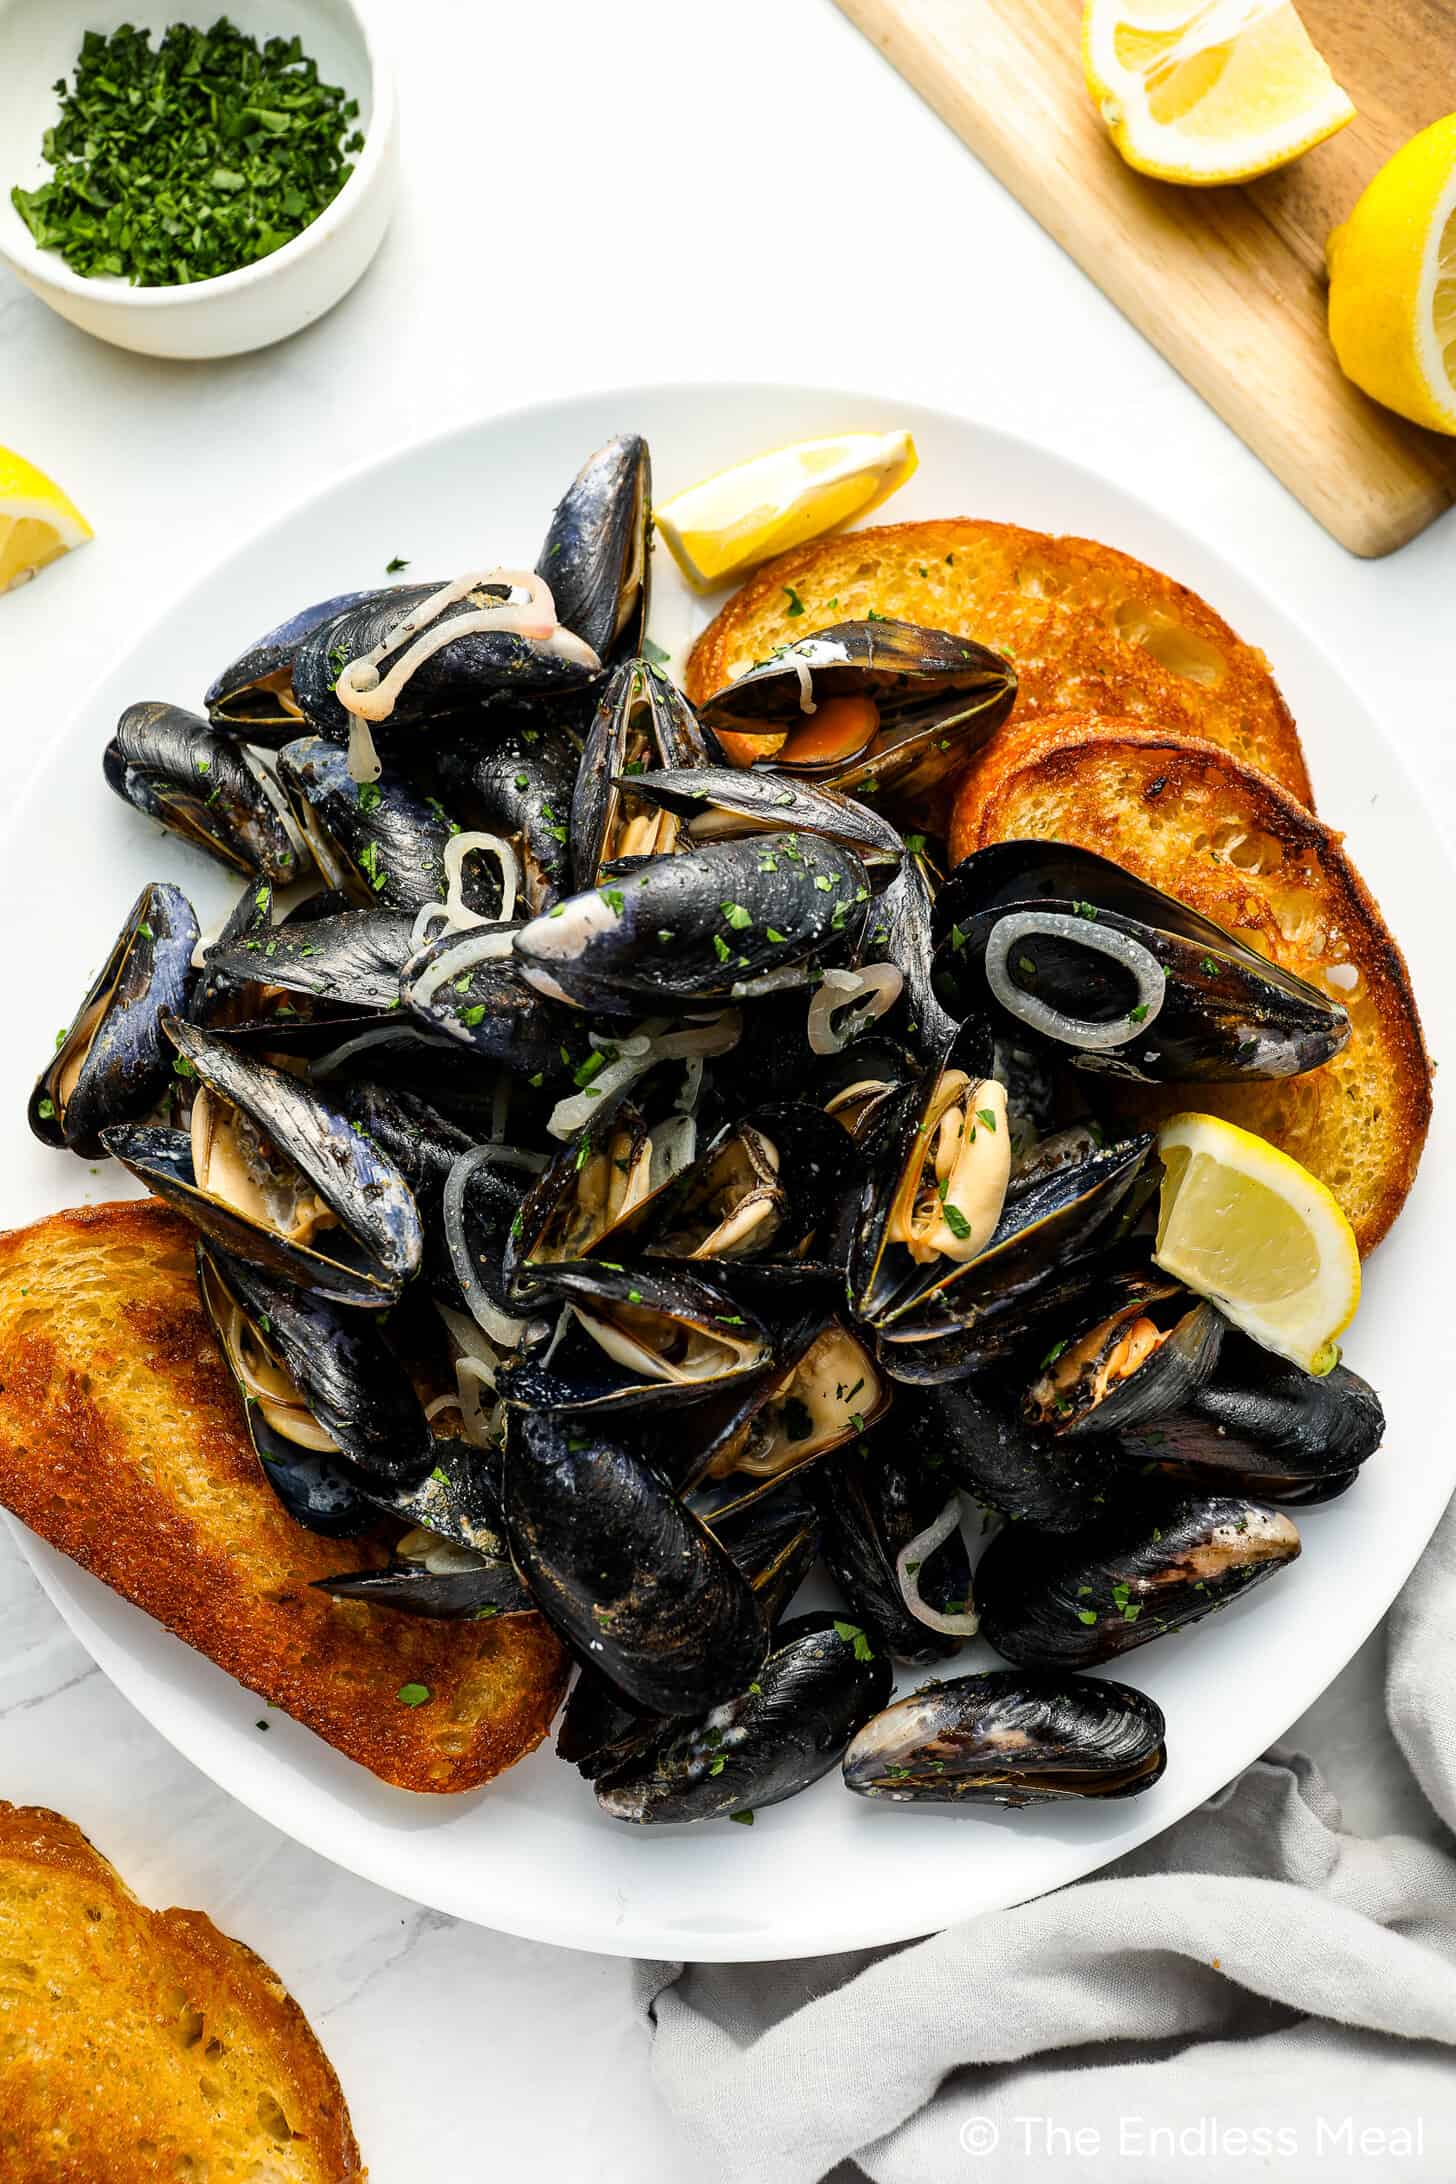 This Mussels Recipe in white wine sauce in a serving bowl with crunchy bread on the side.